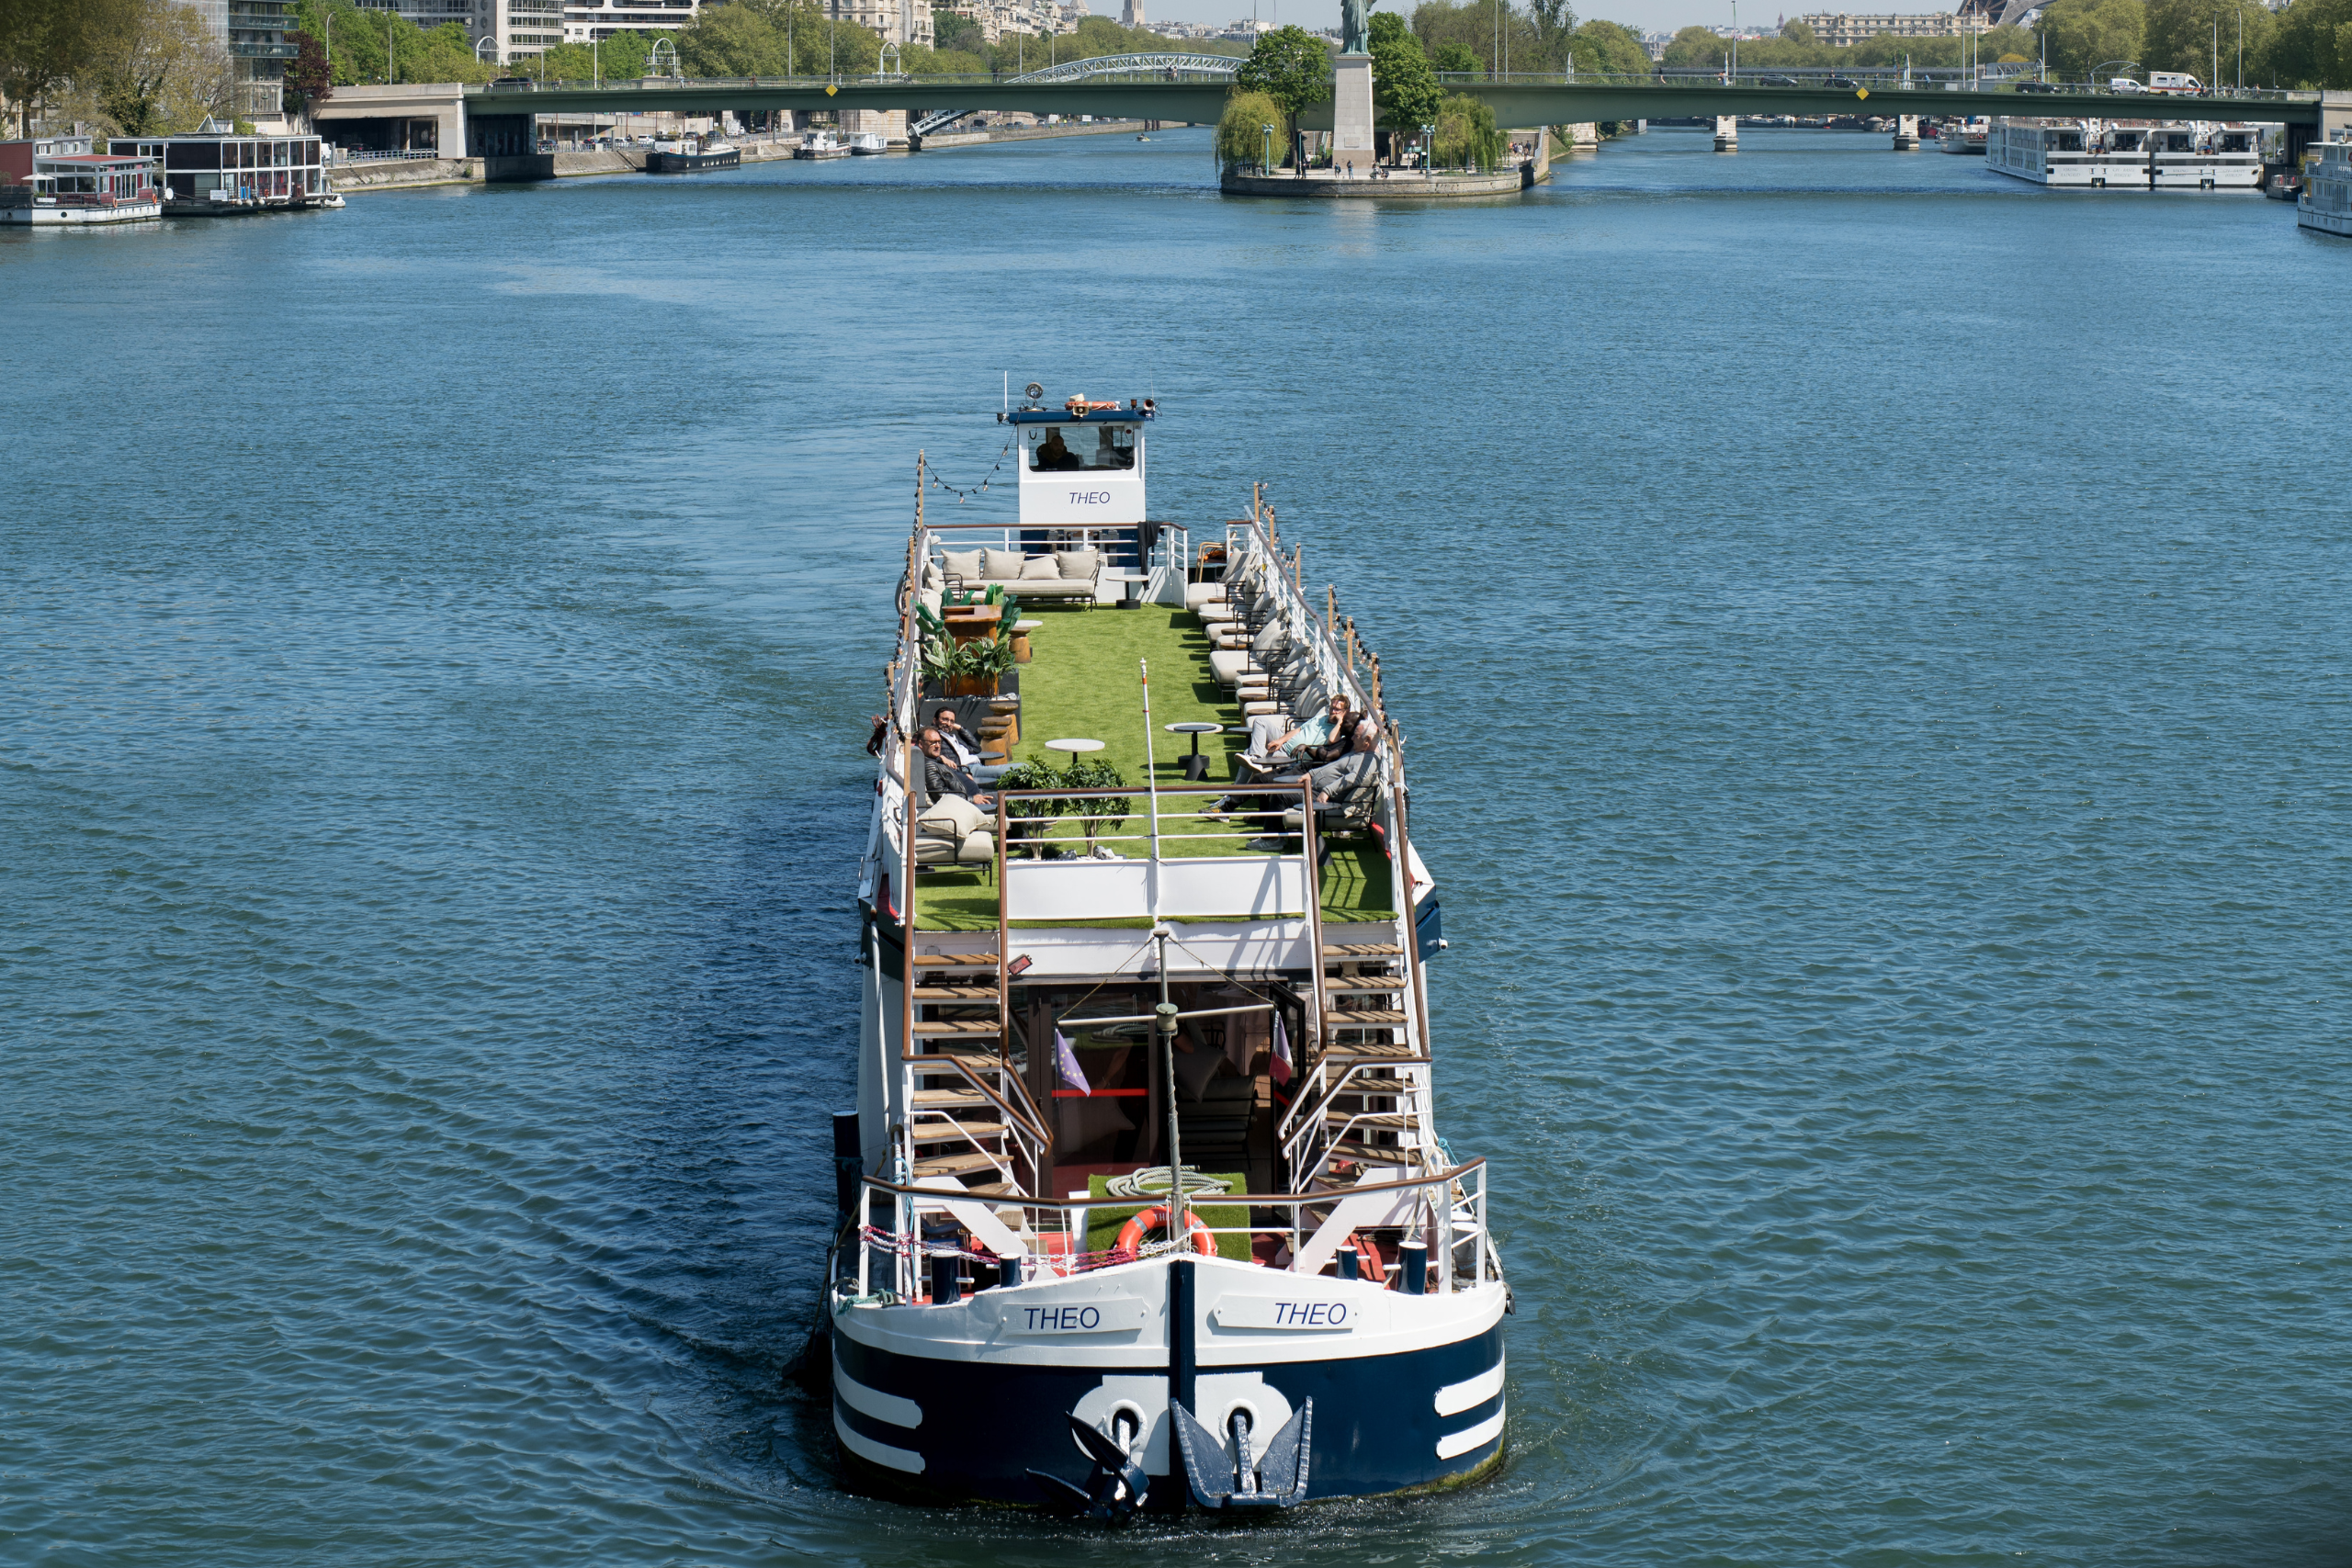 Booking a riverboat in Paris